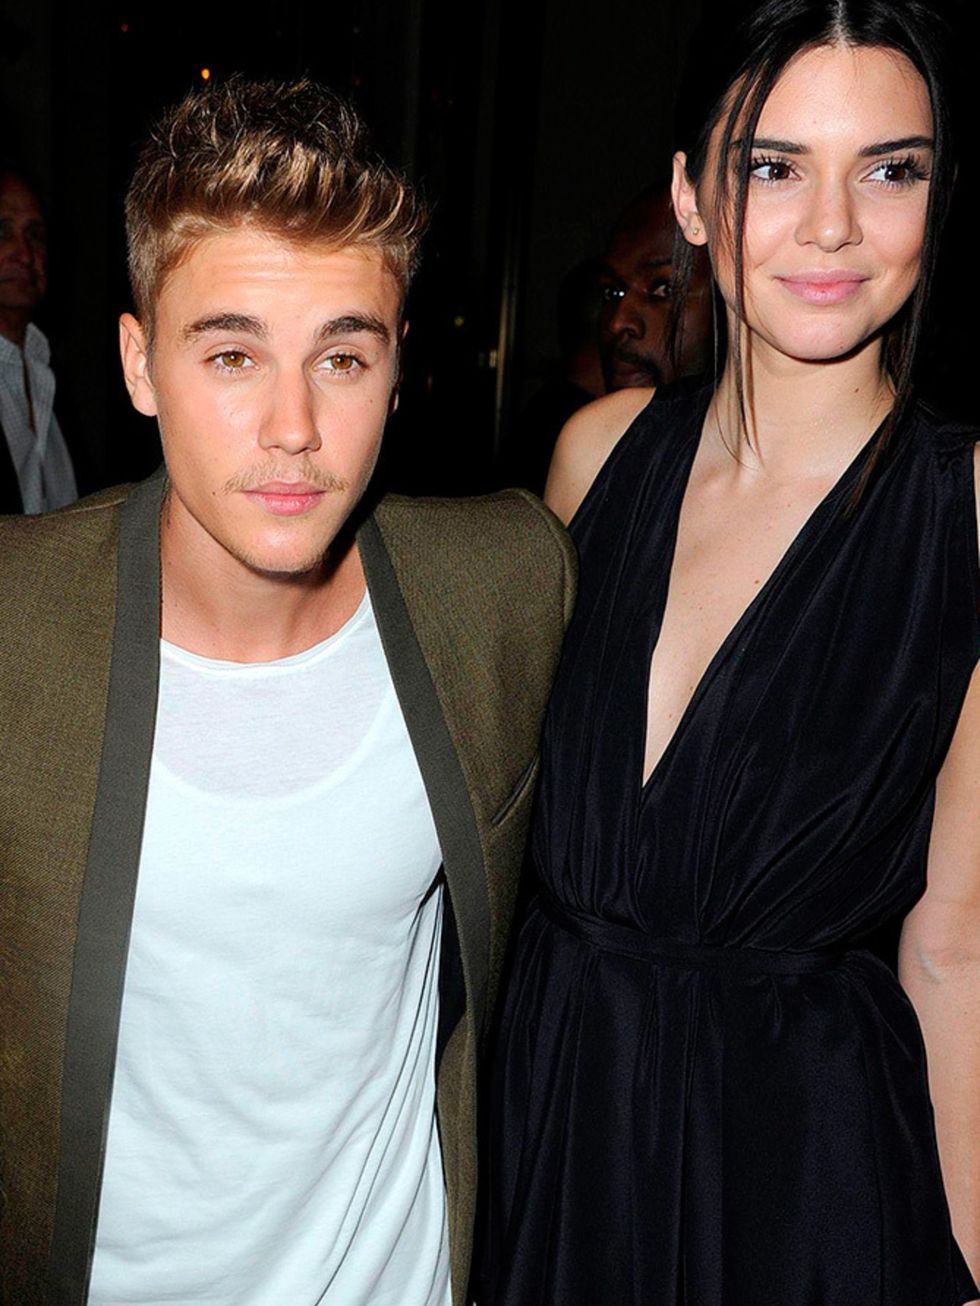 Justin Bieber and Kendall Jenner at CR Fashion Book Issue N.5 Launch Party by Carine Roitfeld And Stephen Gan, during s/s 2015 Paris Fashion Week.